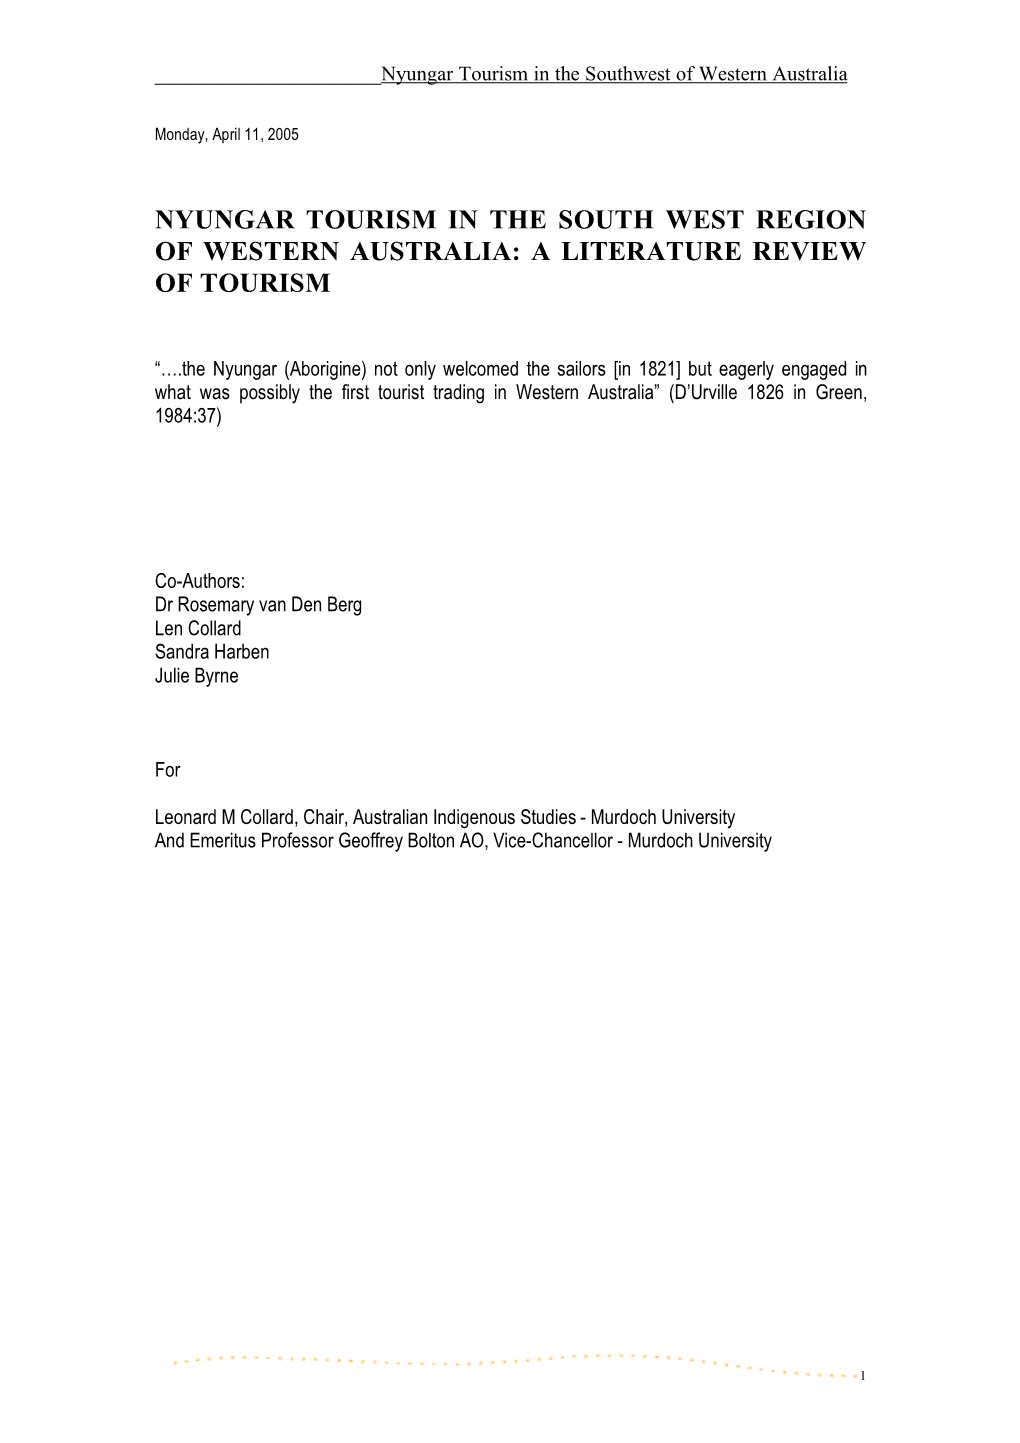 Nyungar Tourism in the South West Region of Western Australia: a Literature Review of Tourism